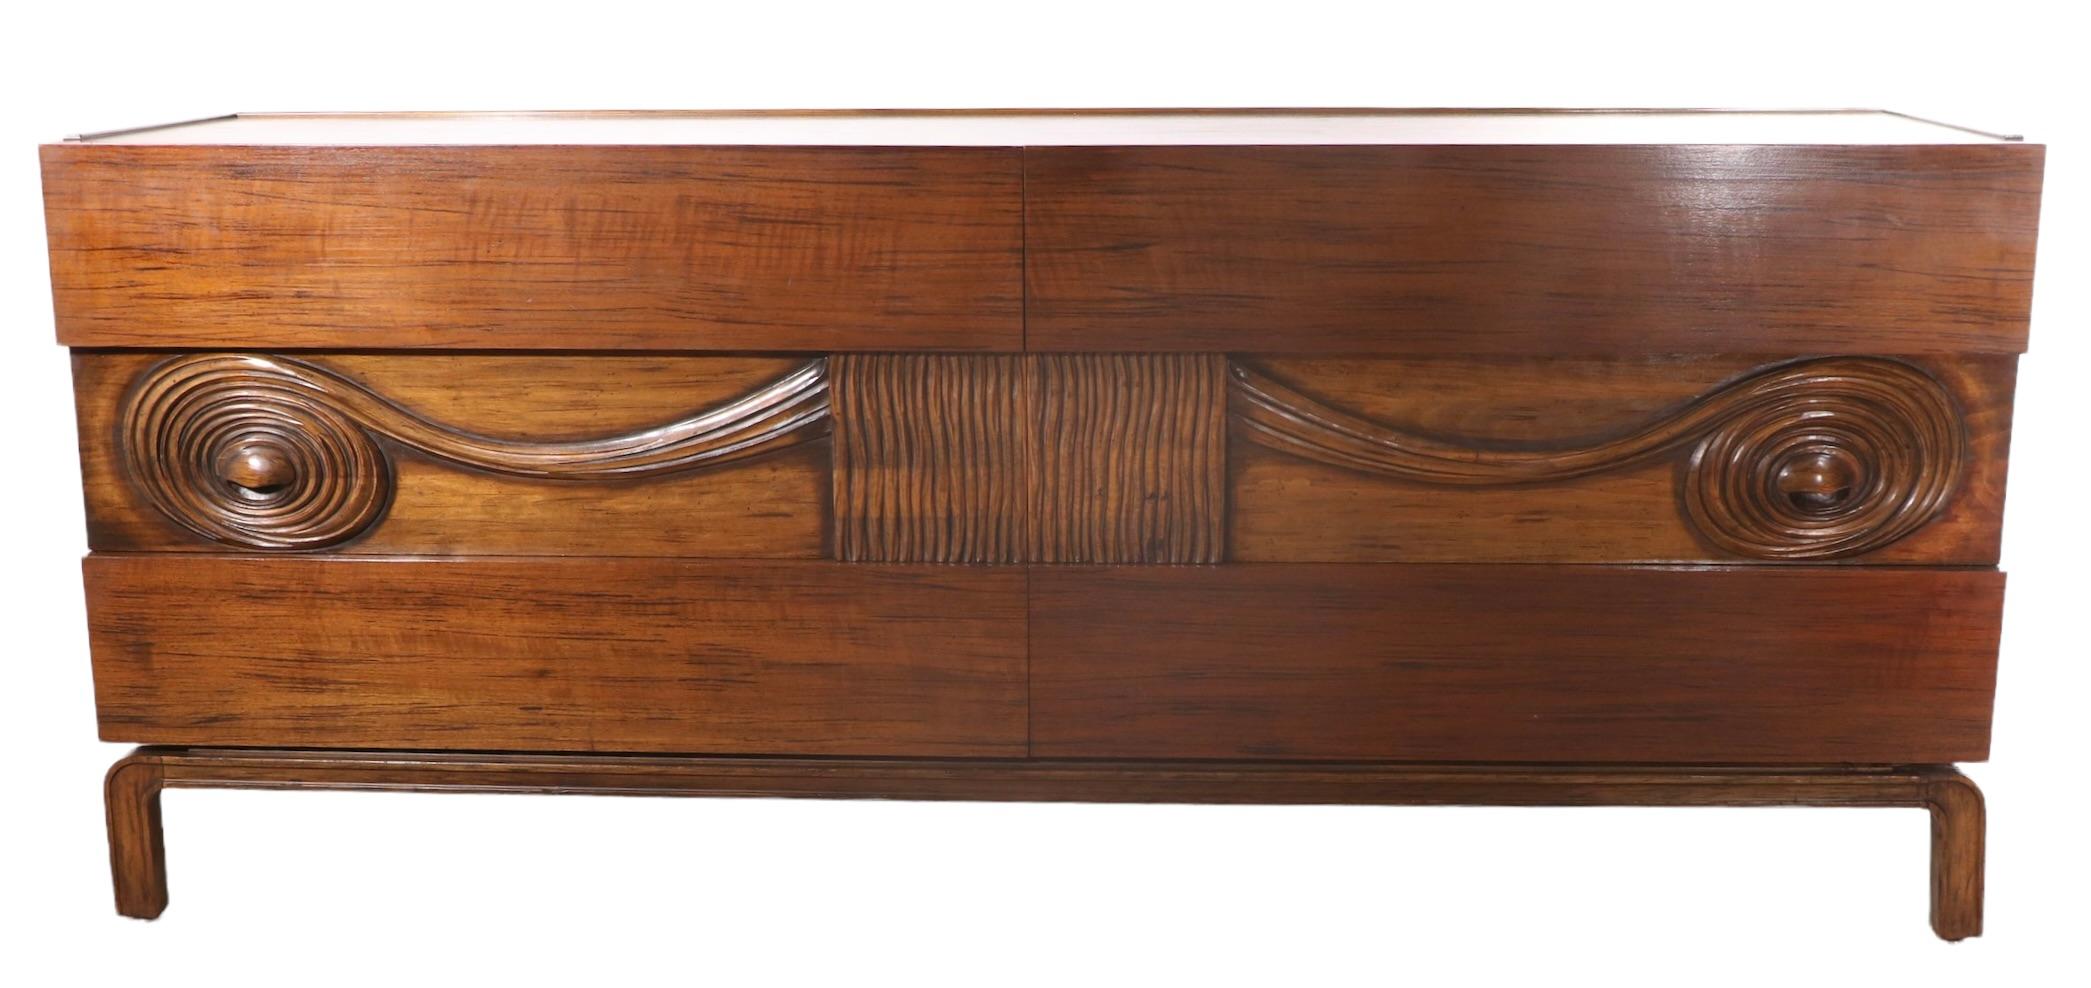 Wood High Style Six Drawers Dresser by Edmond Spence Made in Sweden Ca. 1950's  For Sale